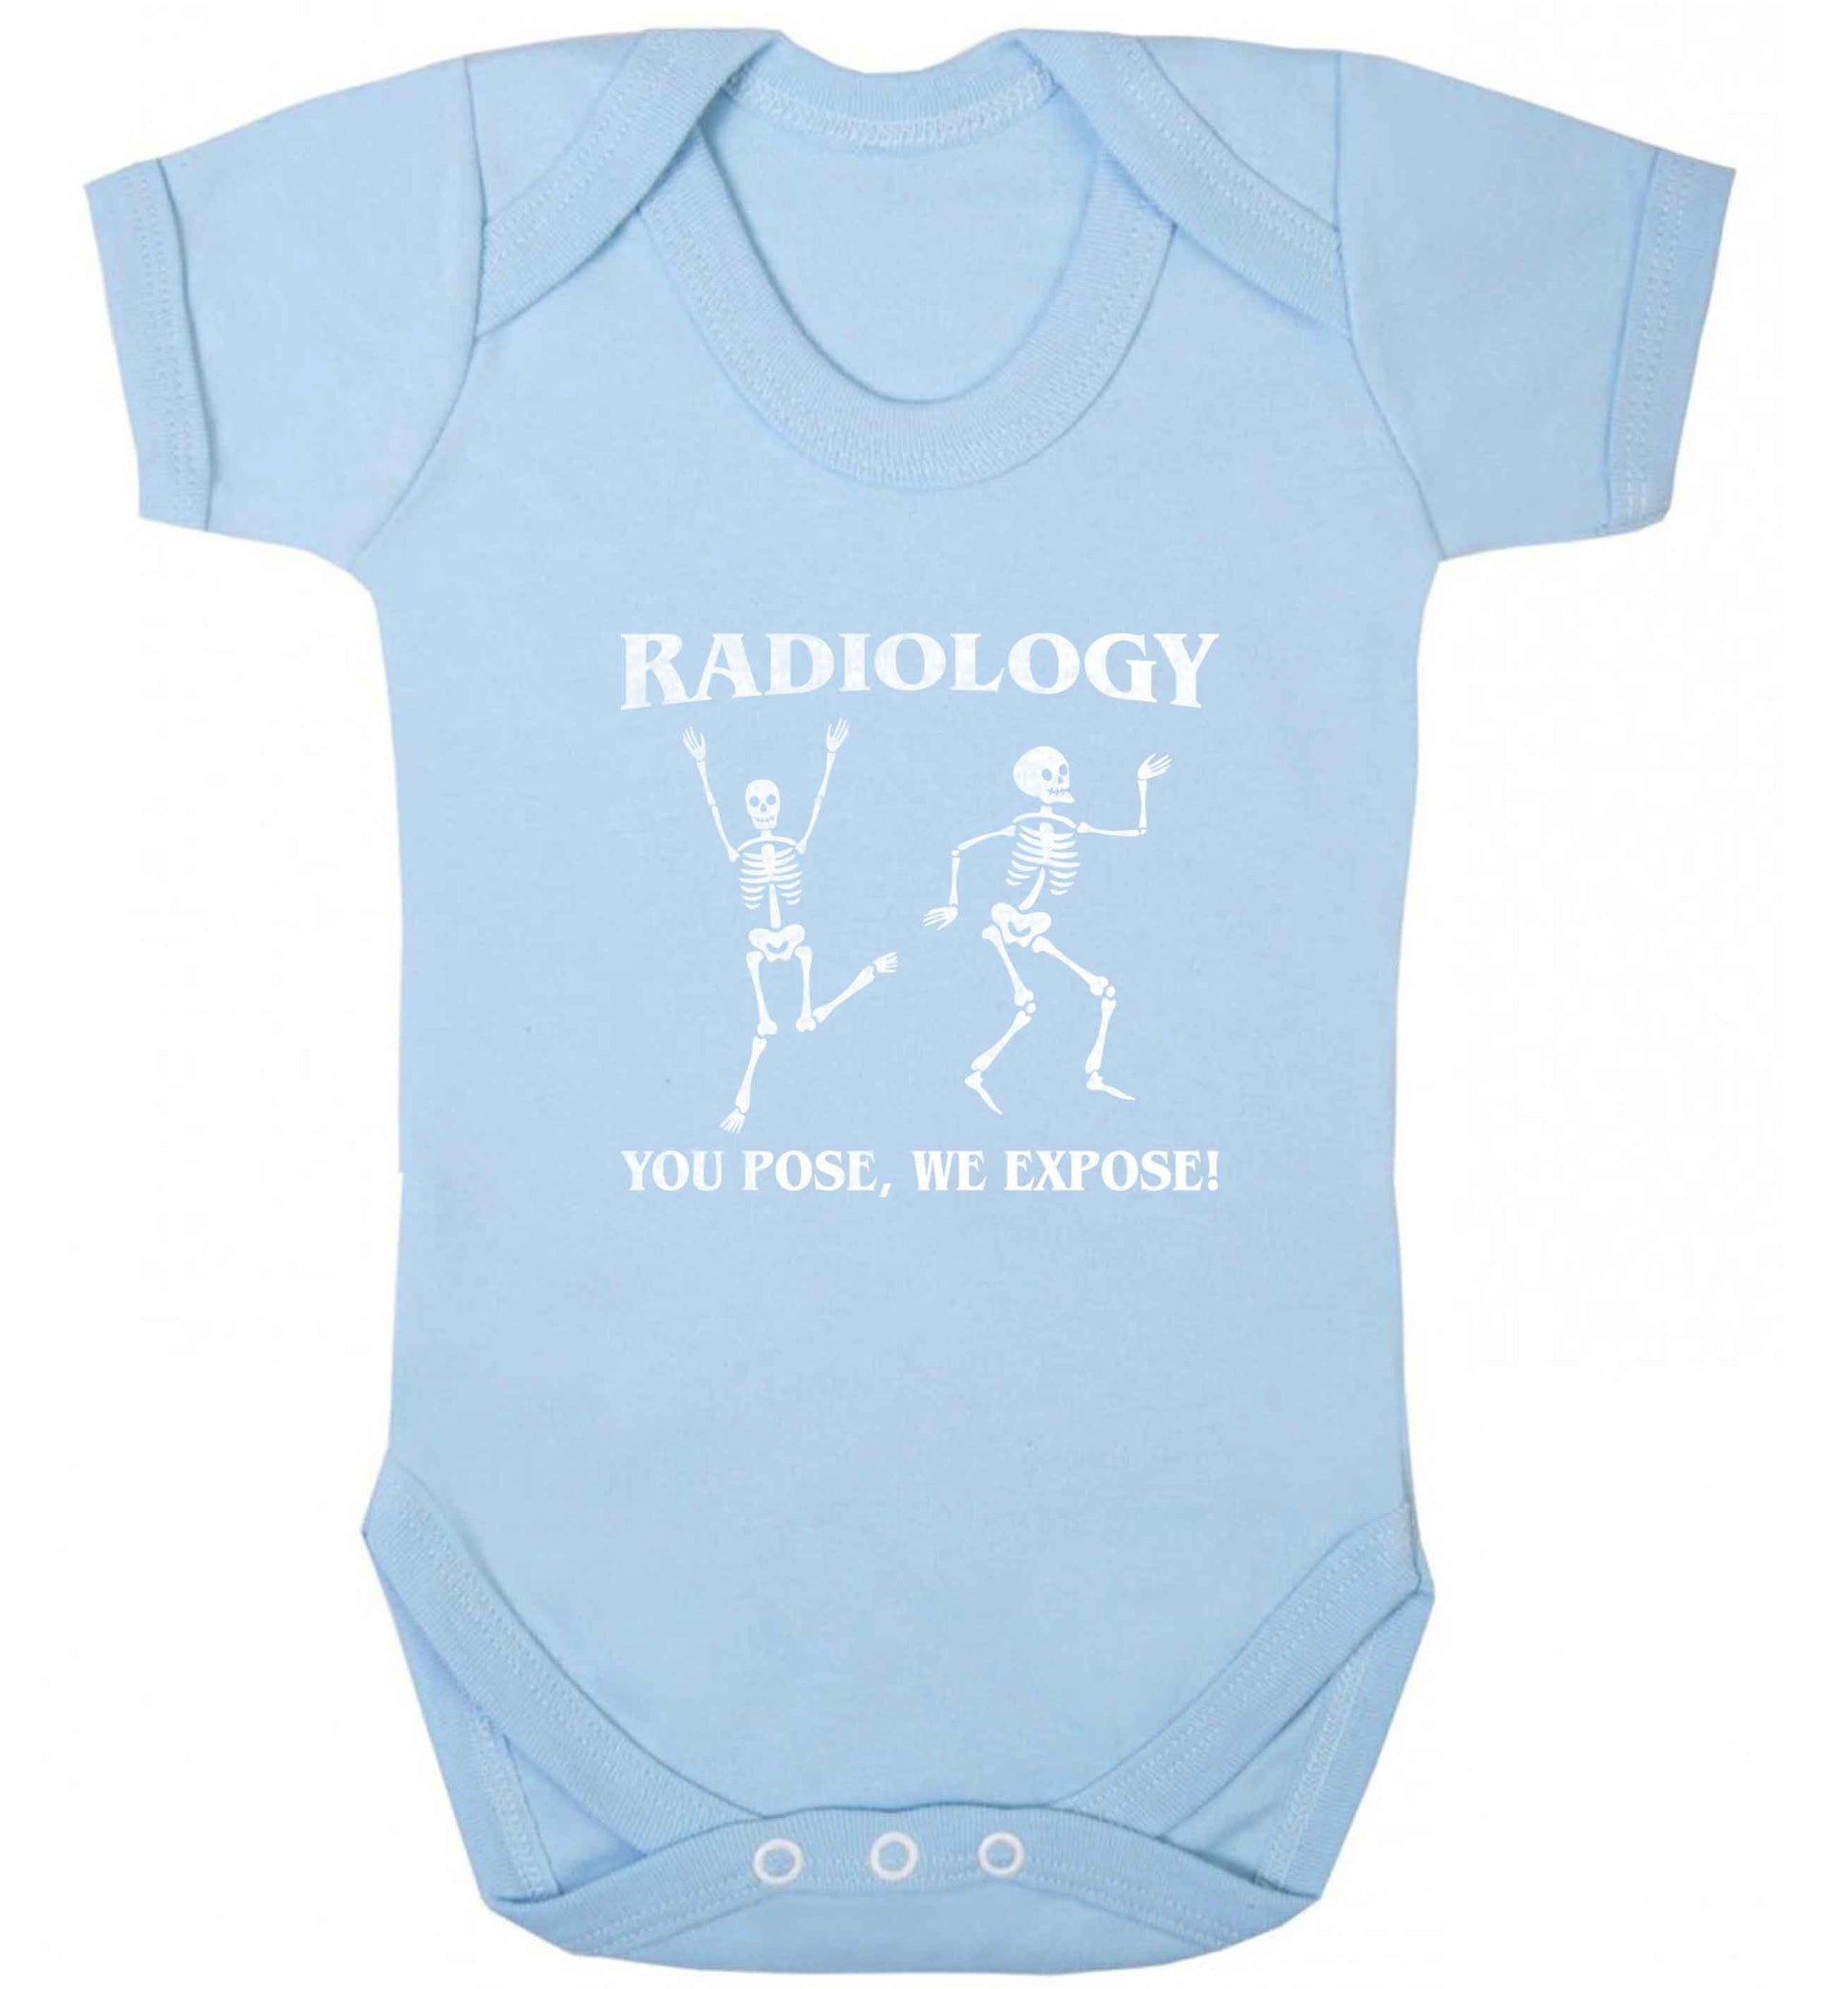 Radiology you pose we expose baby vest pale blue 18-24 months